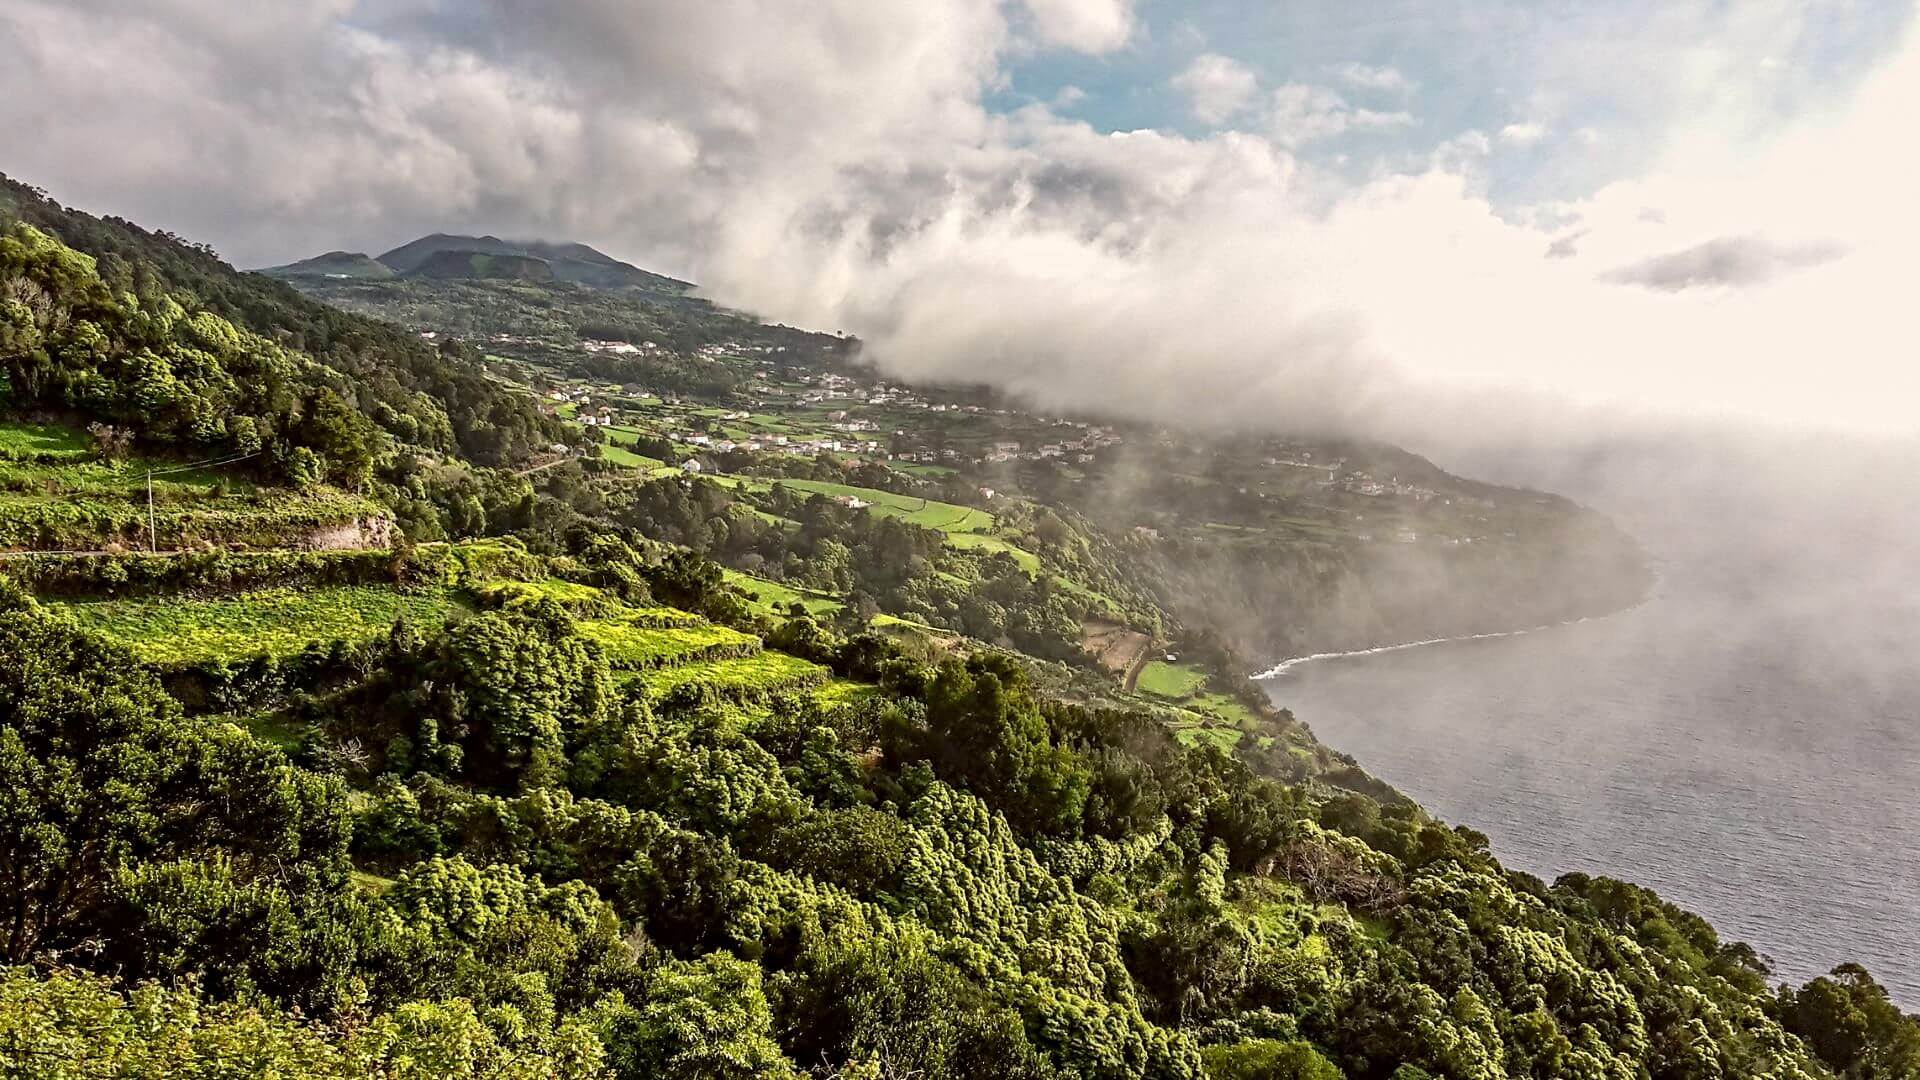 Sao Jorge - a green and lush island in the Azores covered with moody clouds